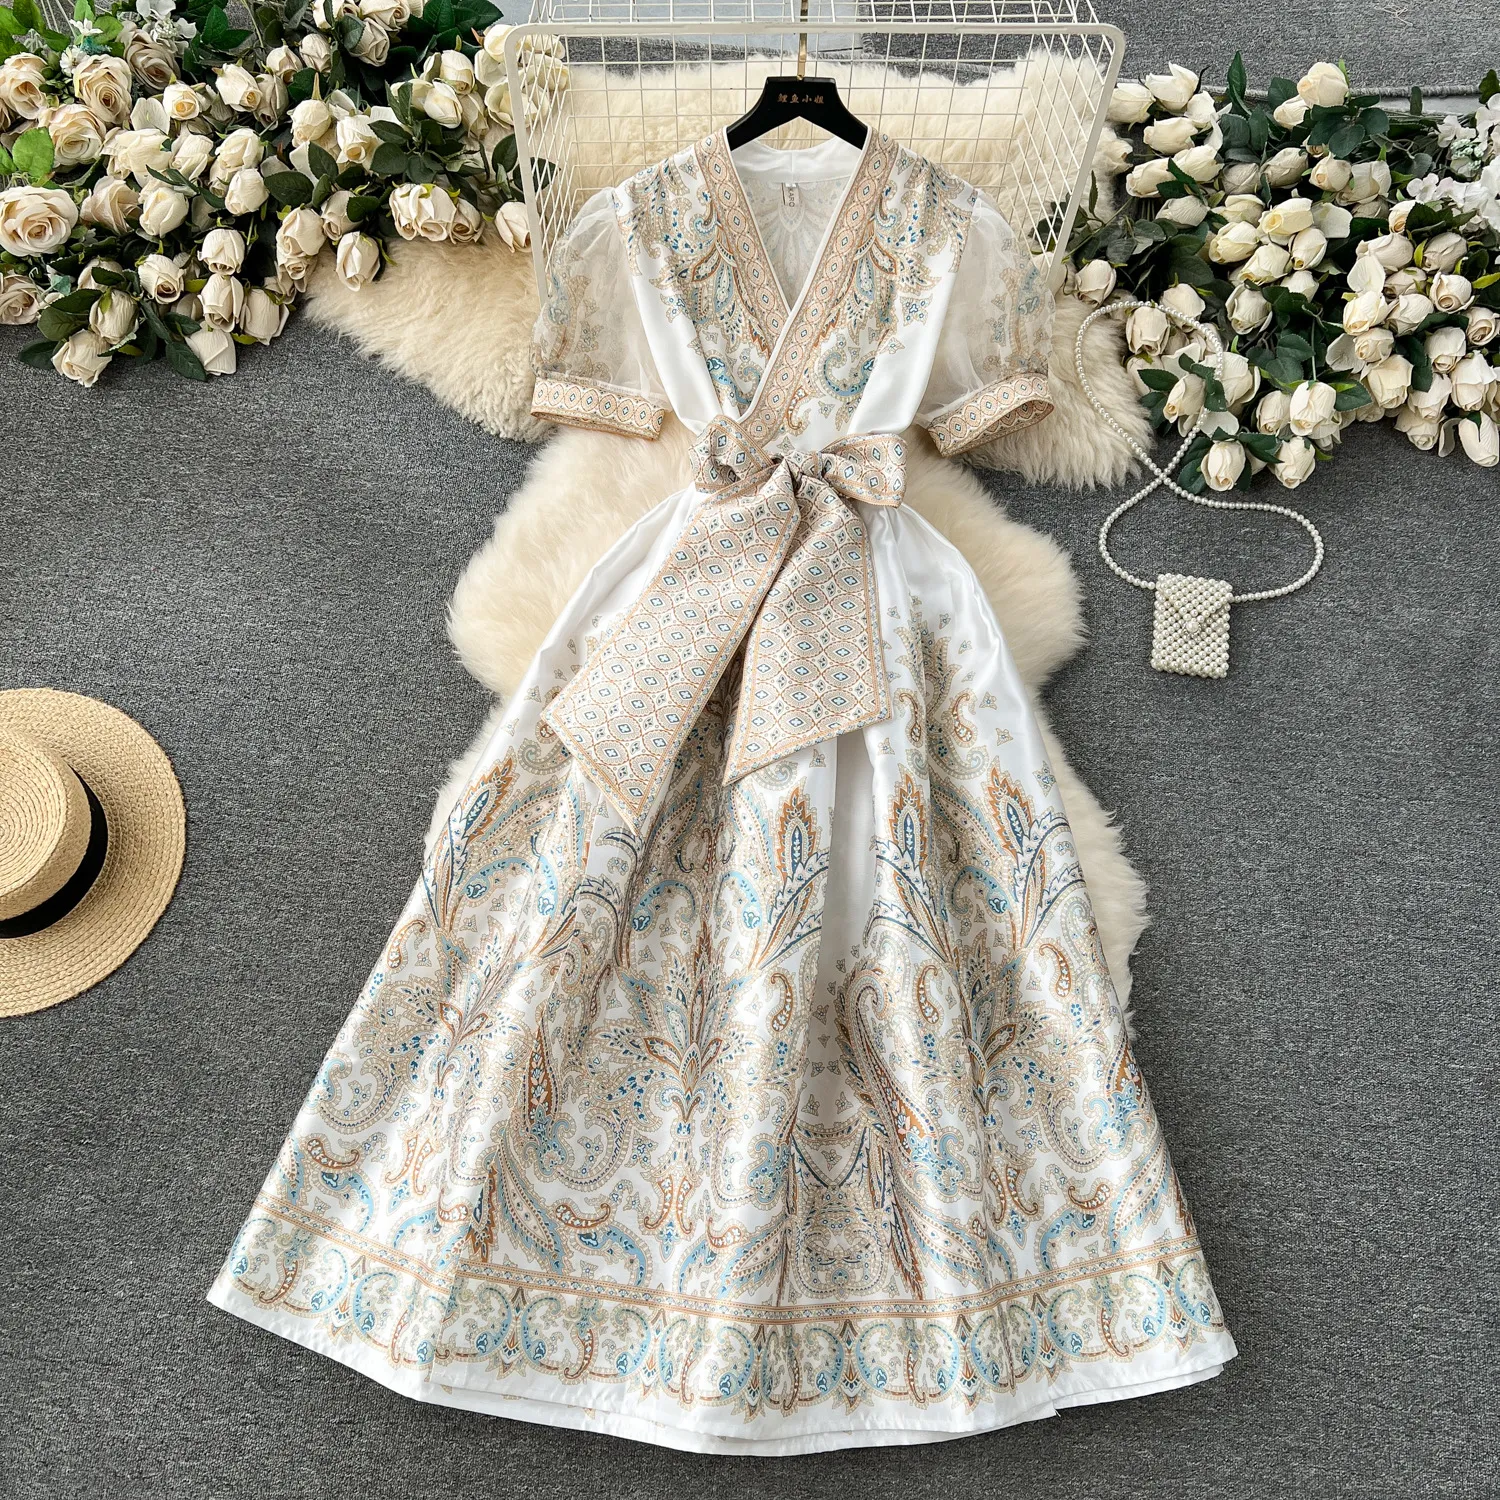 European court style dress for women with retro print and tie up waist for slimming and high-end feeling. Long bubble sleeve dress for women